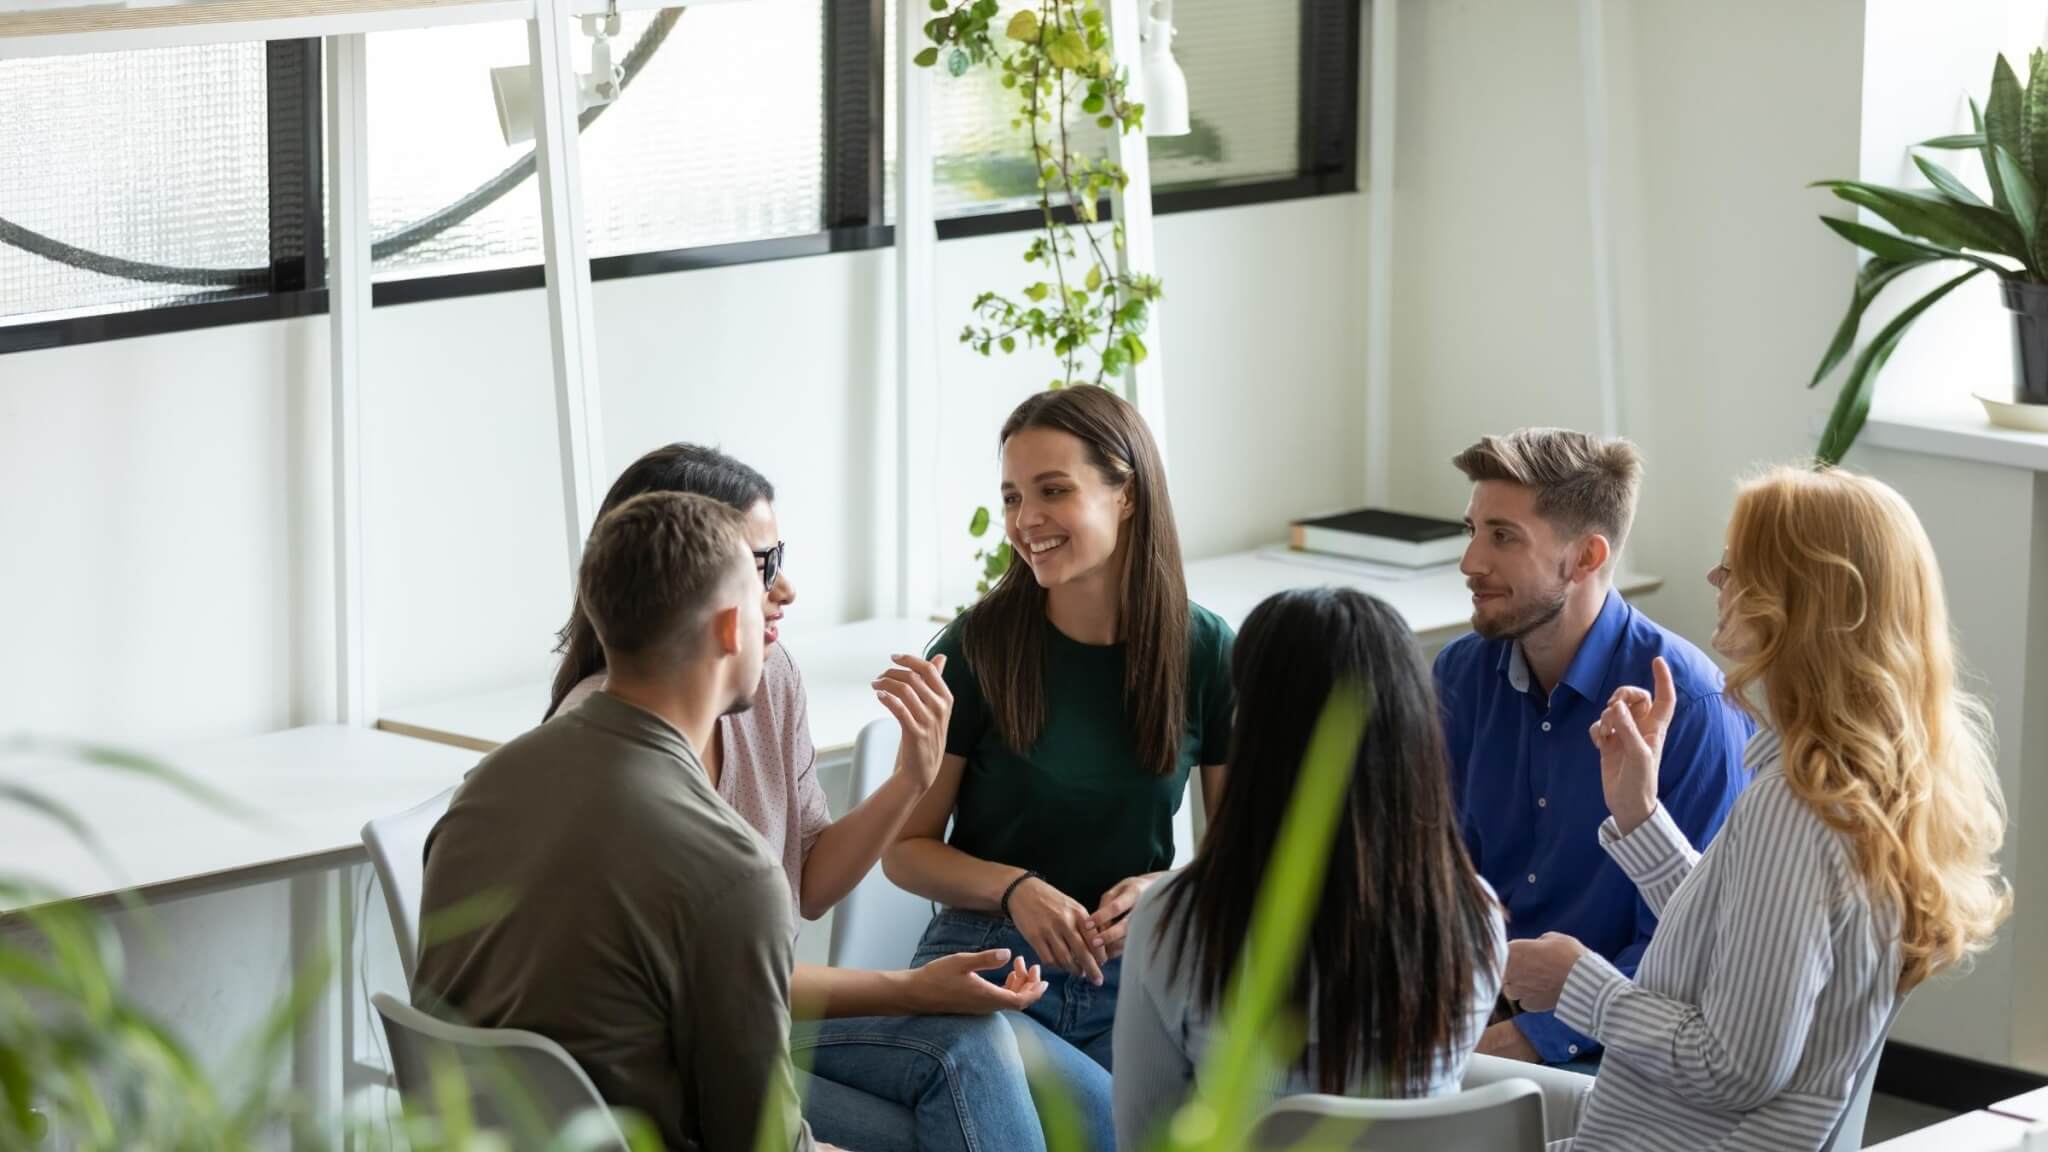 10 Effective Ways to Conduct A Positive Meeting 